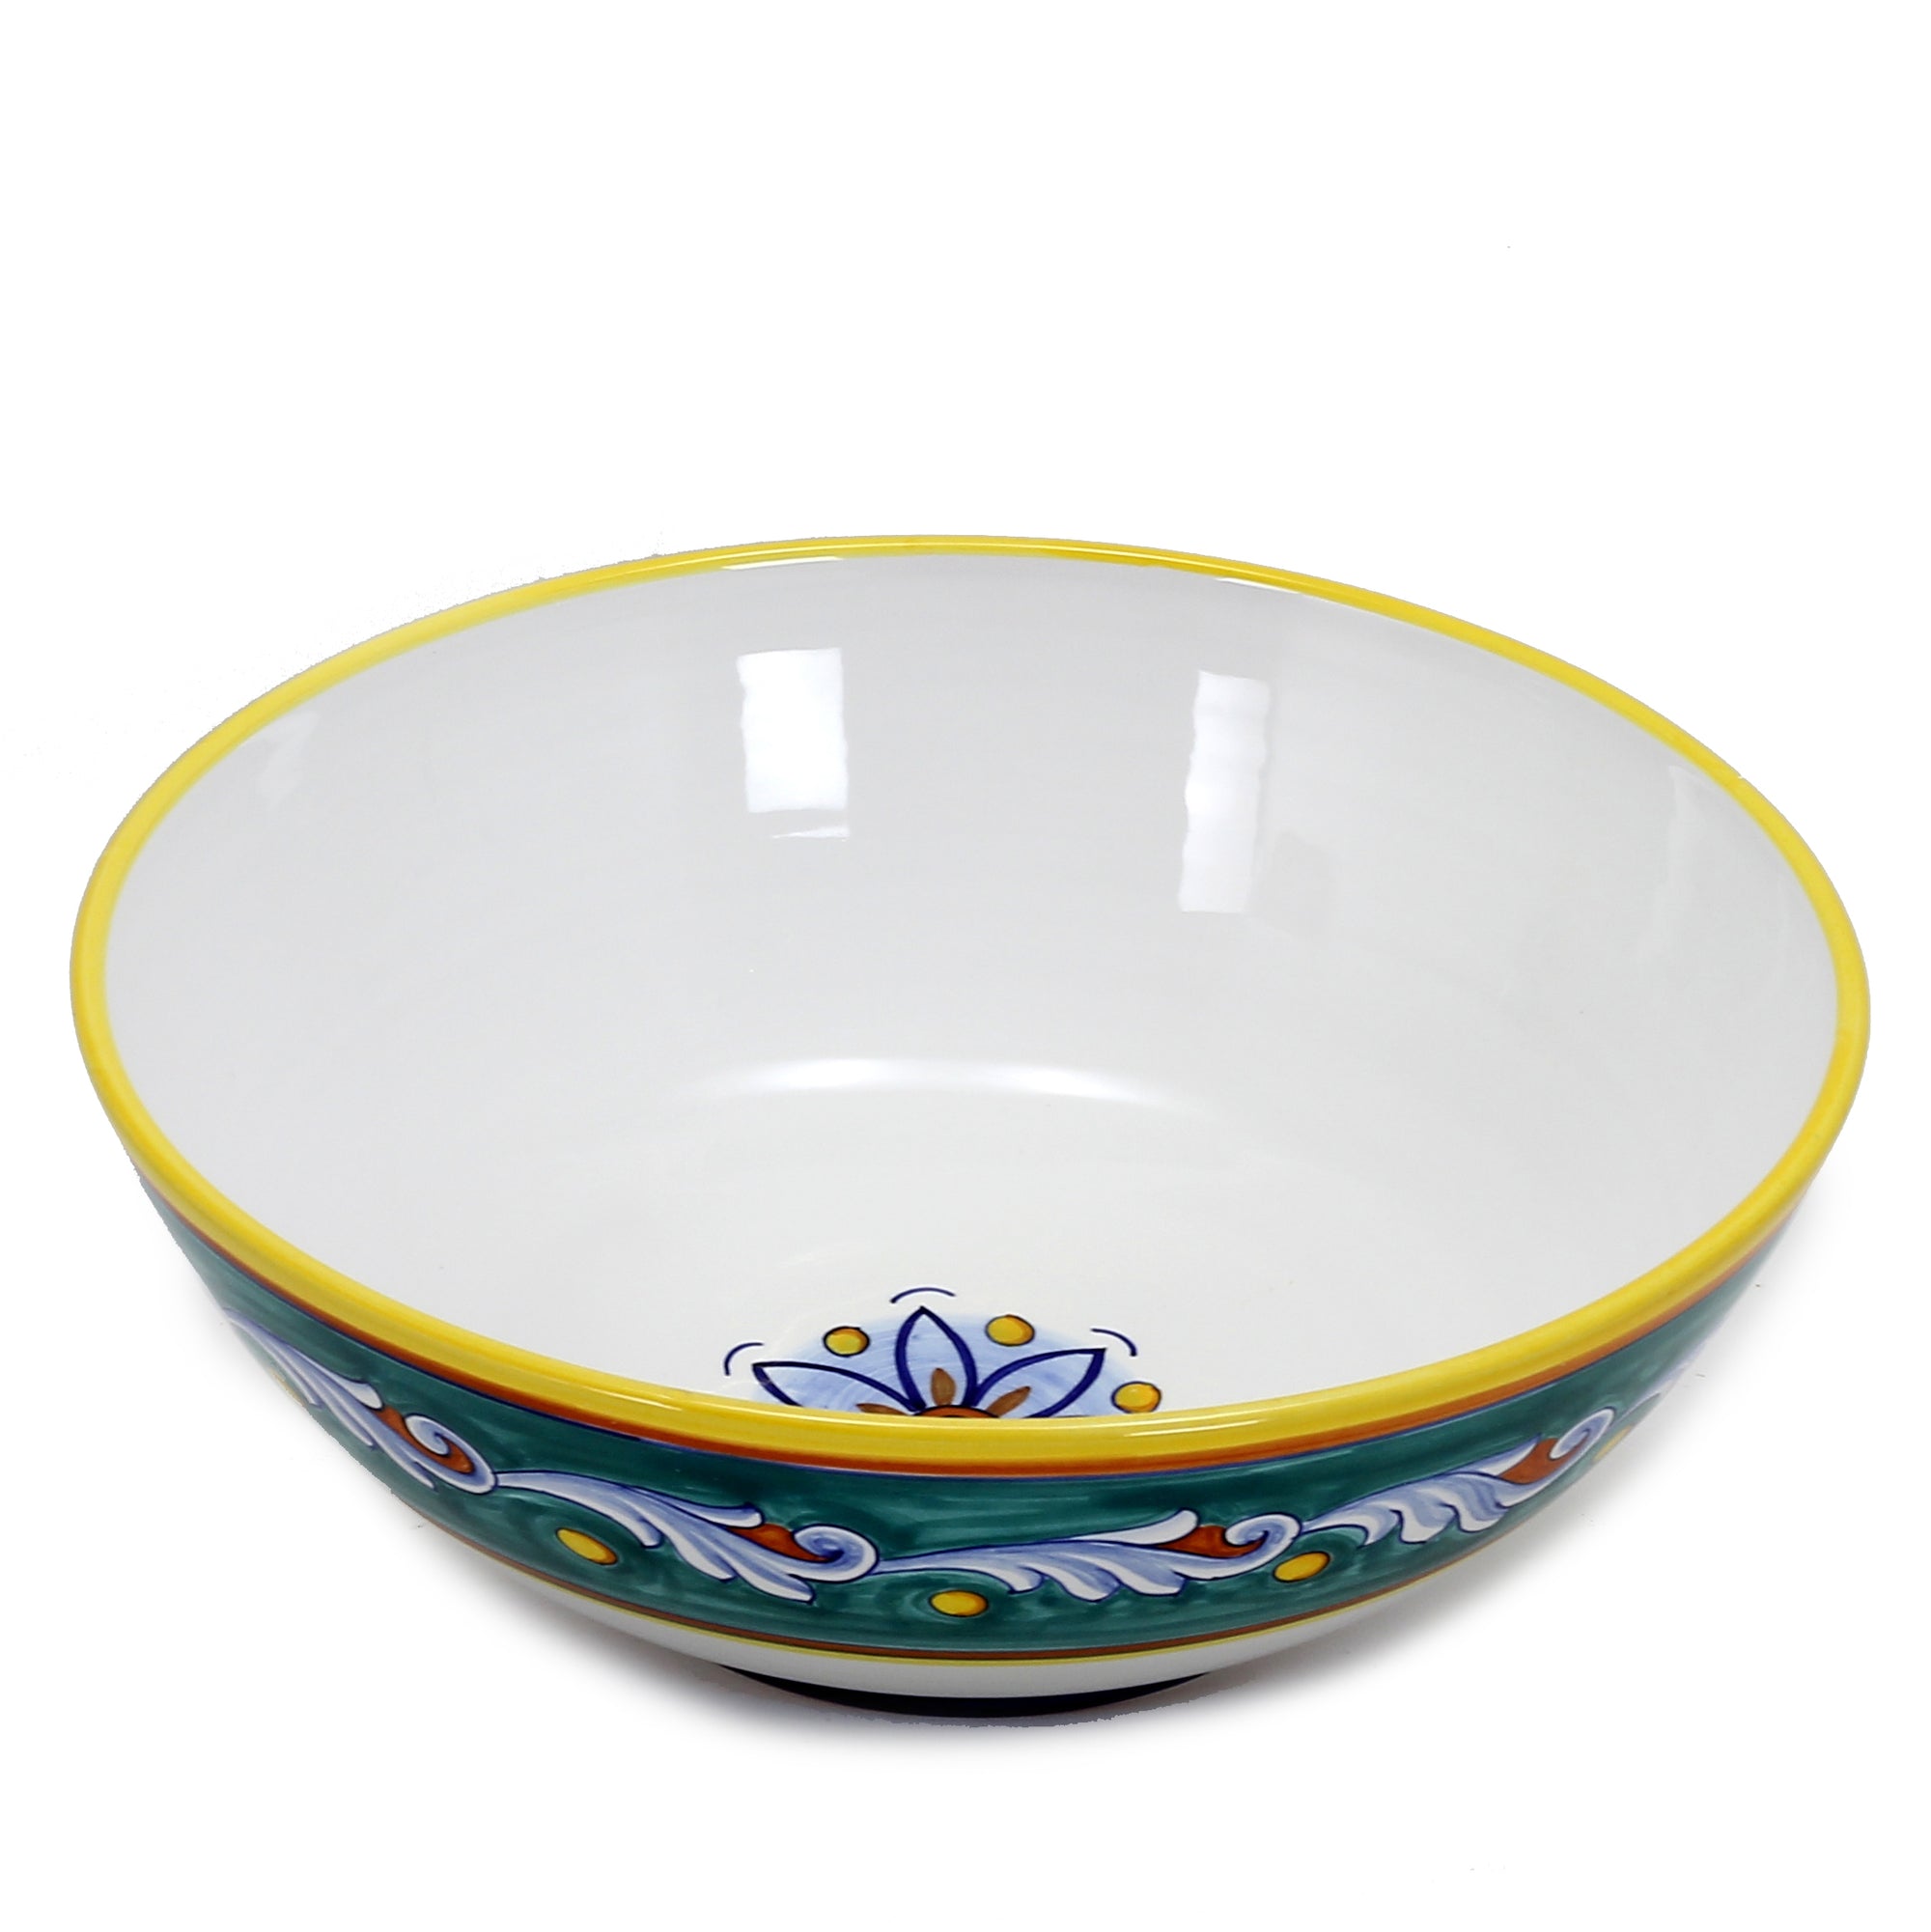 pasta serving bowl with handles